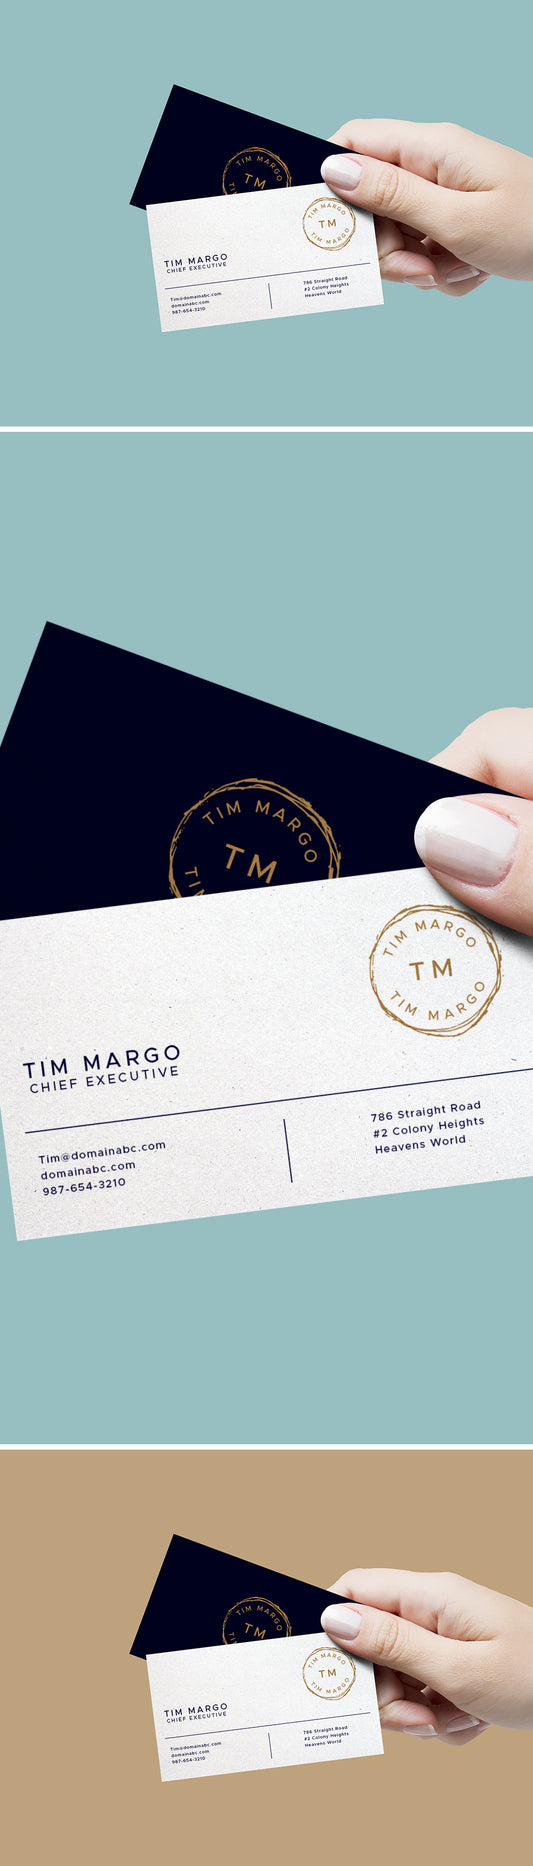 Free Hand Holding Business Cards Mockup